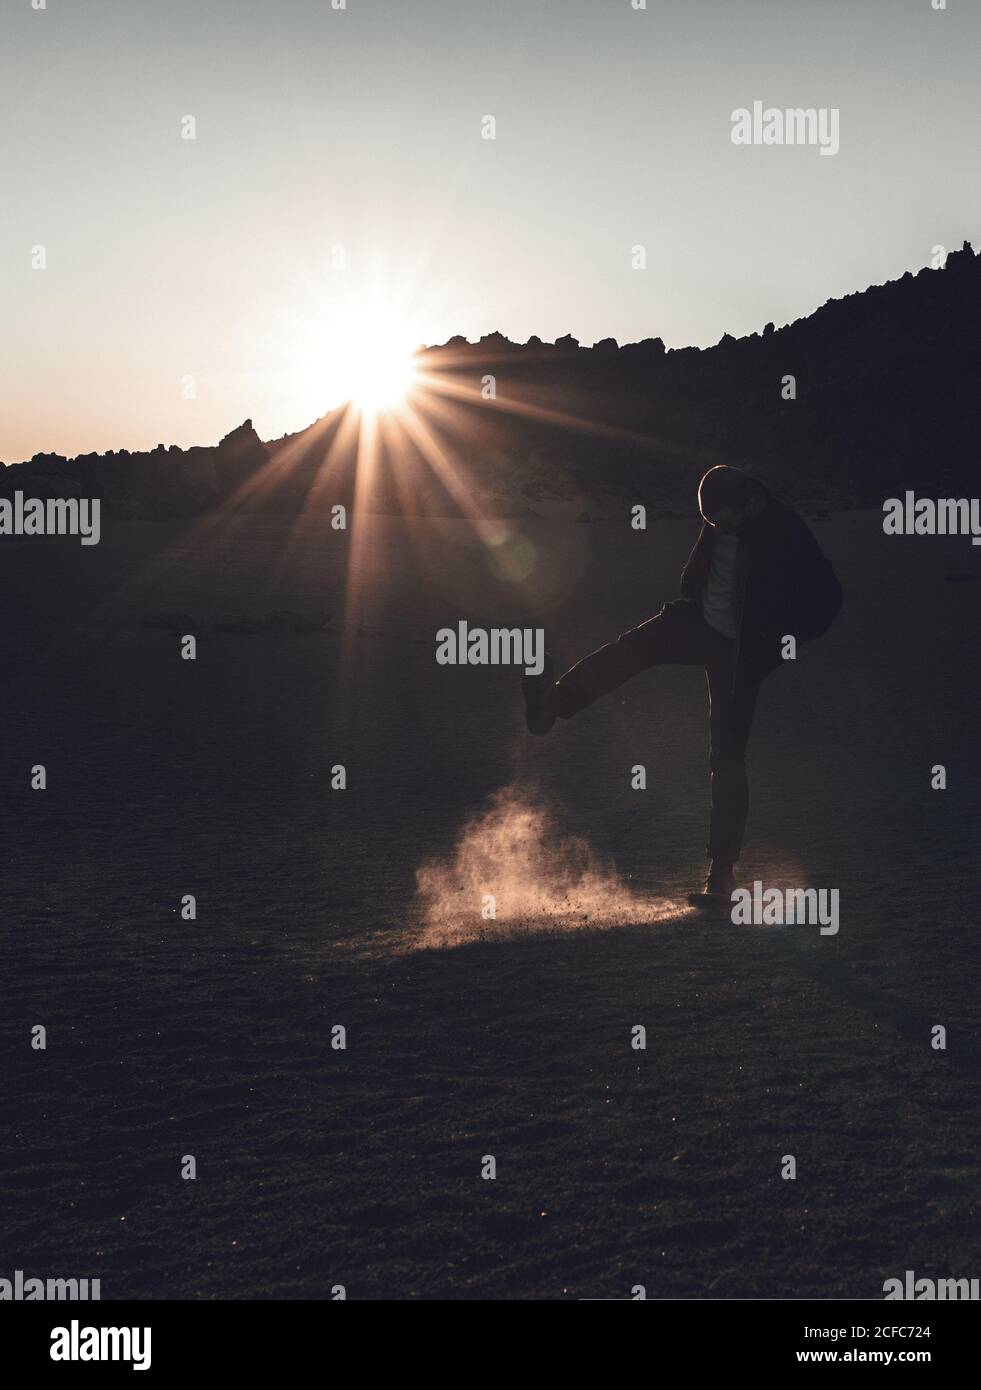 Silhouette of male with lifted leg kicking up sand dust in remote desert standing in sunset back lit on Tenerife Stock Photo